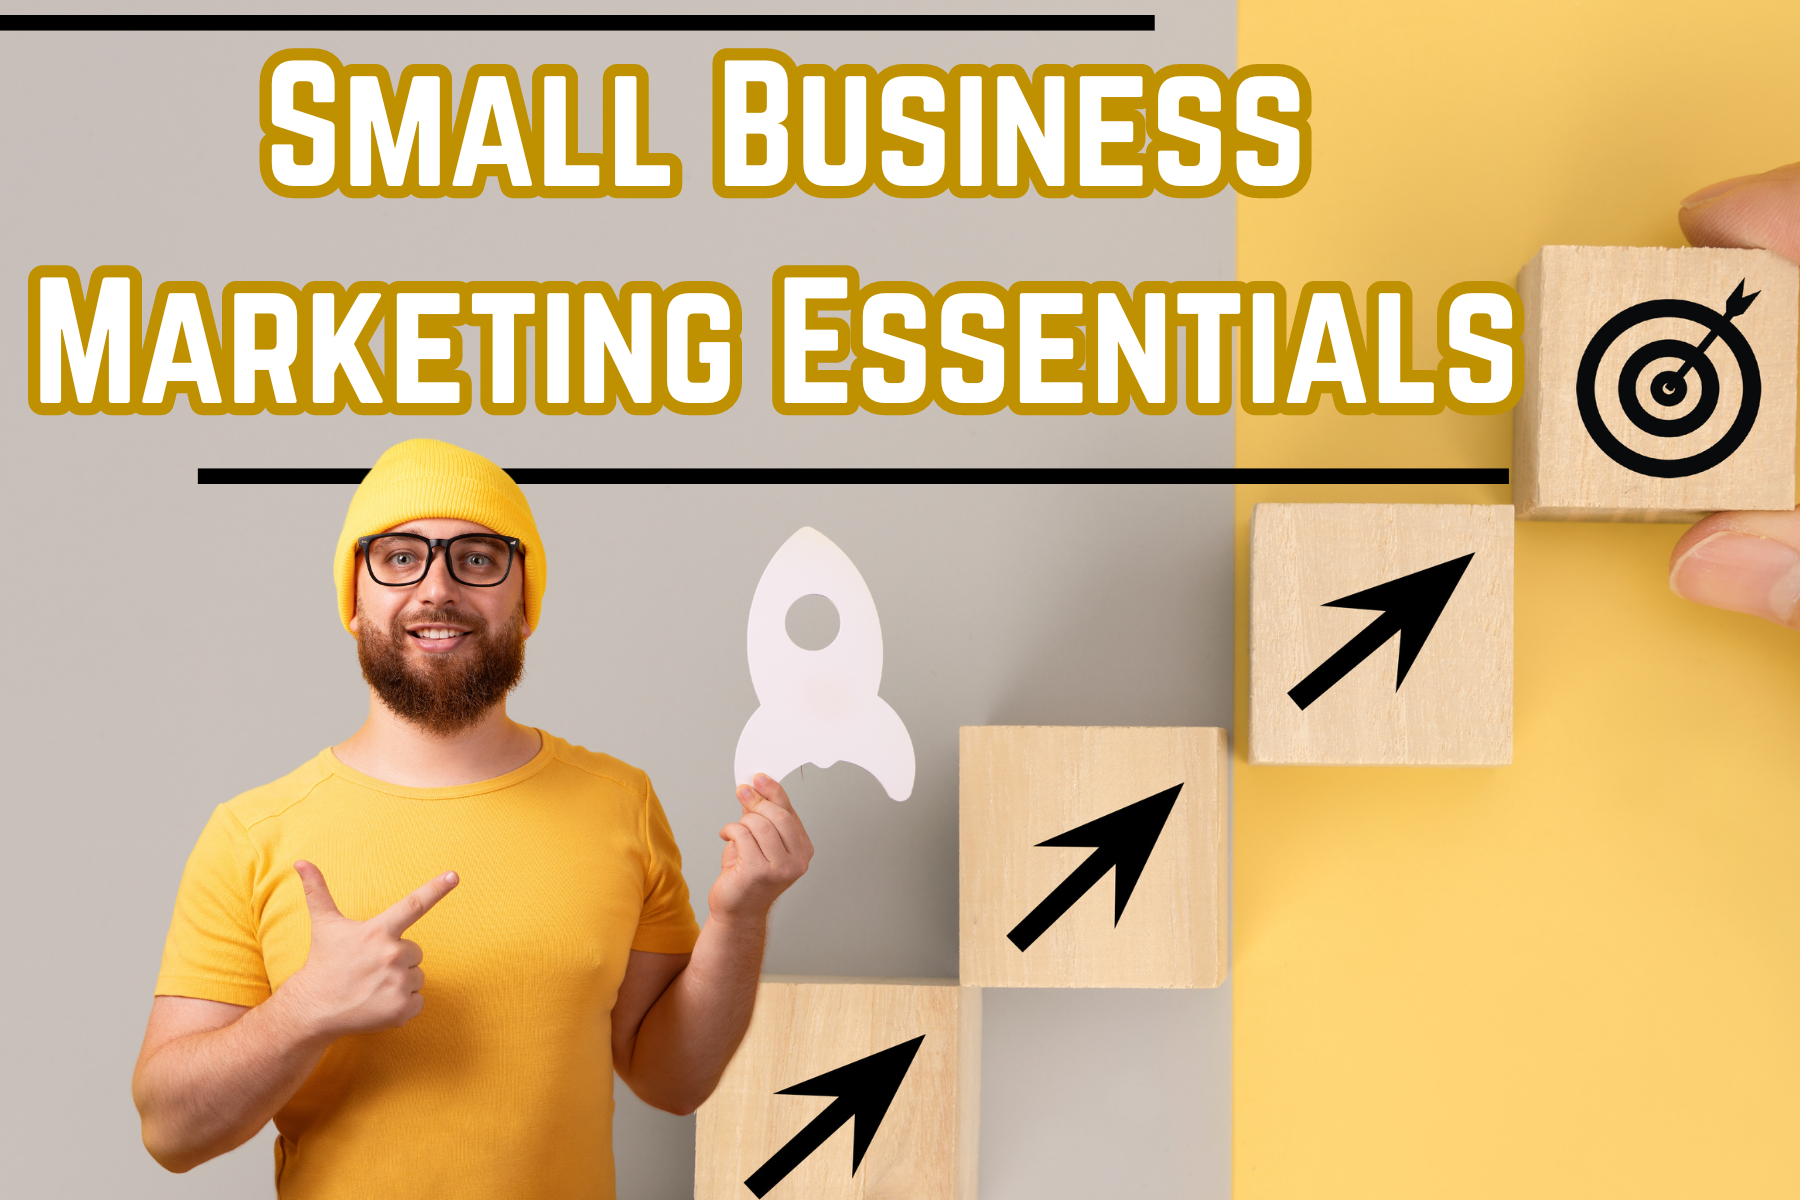 9 Small Business Marketing Essentials to Increase Engaged Contacts and Inbound Leads